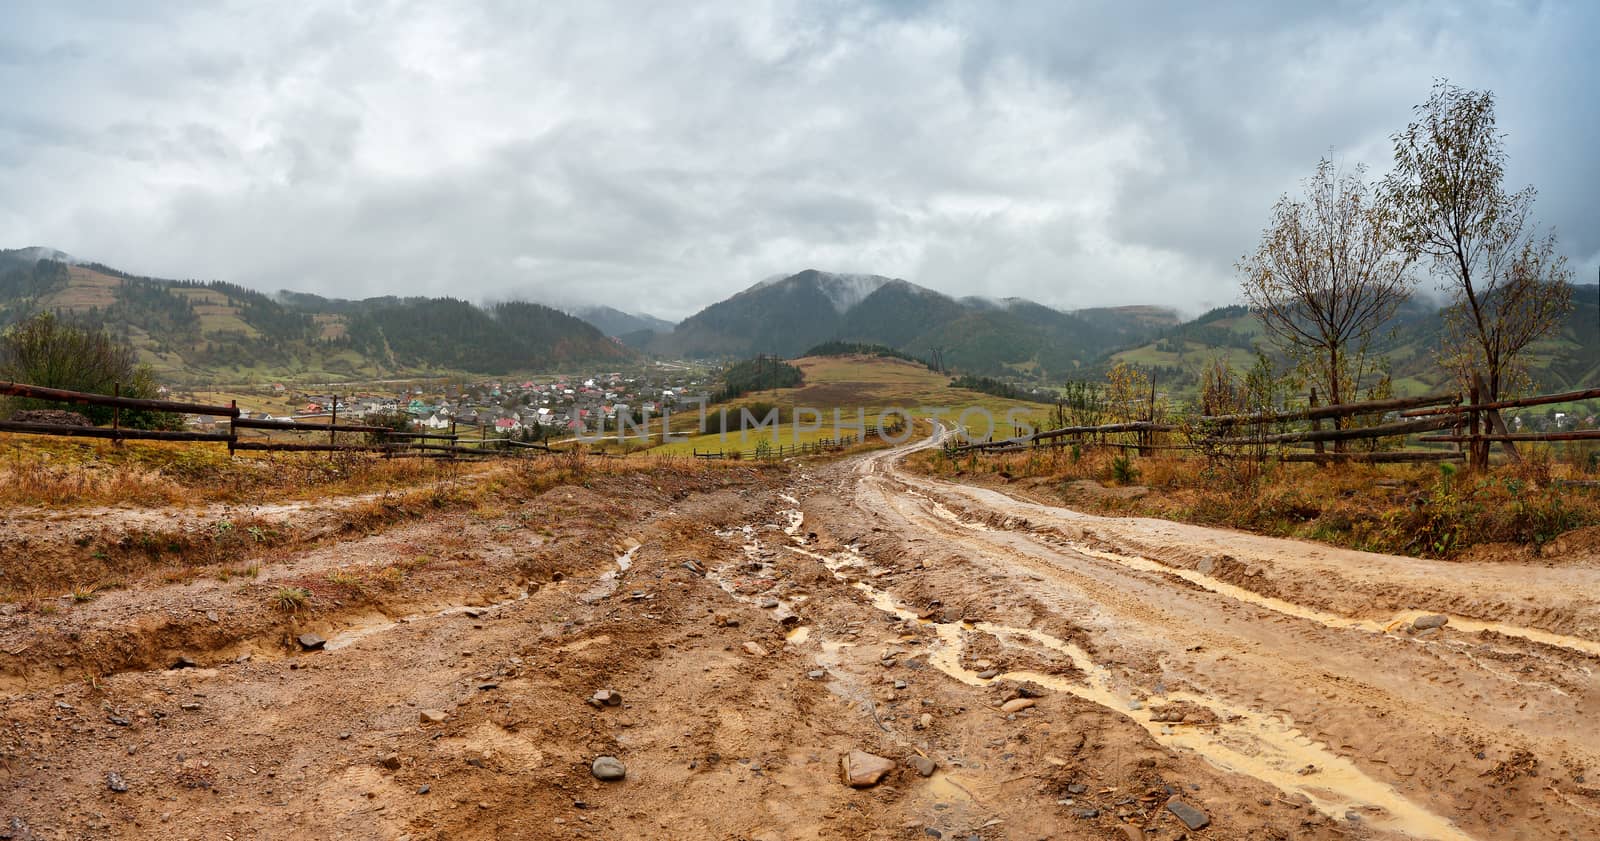 Muddy ground after rain in mountains. Extreme path rural dirt ro by weise_maxim